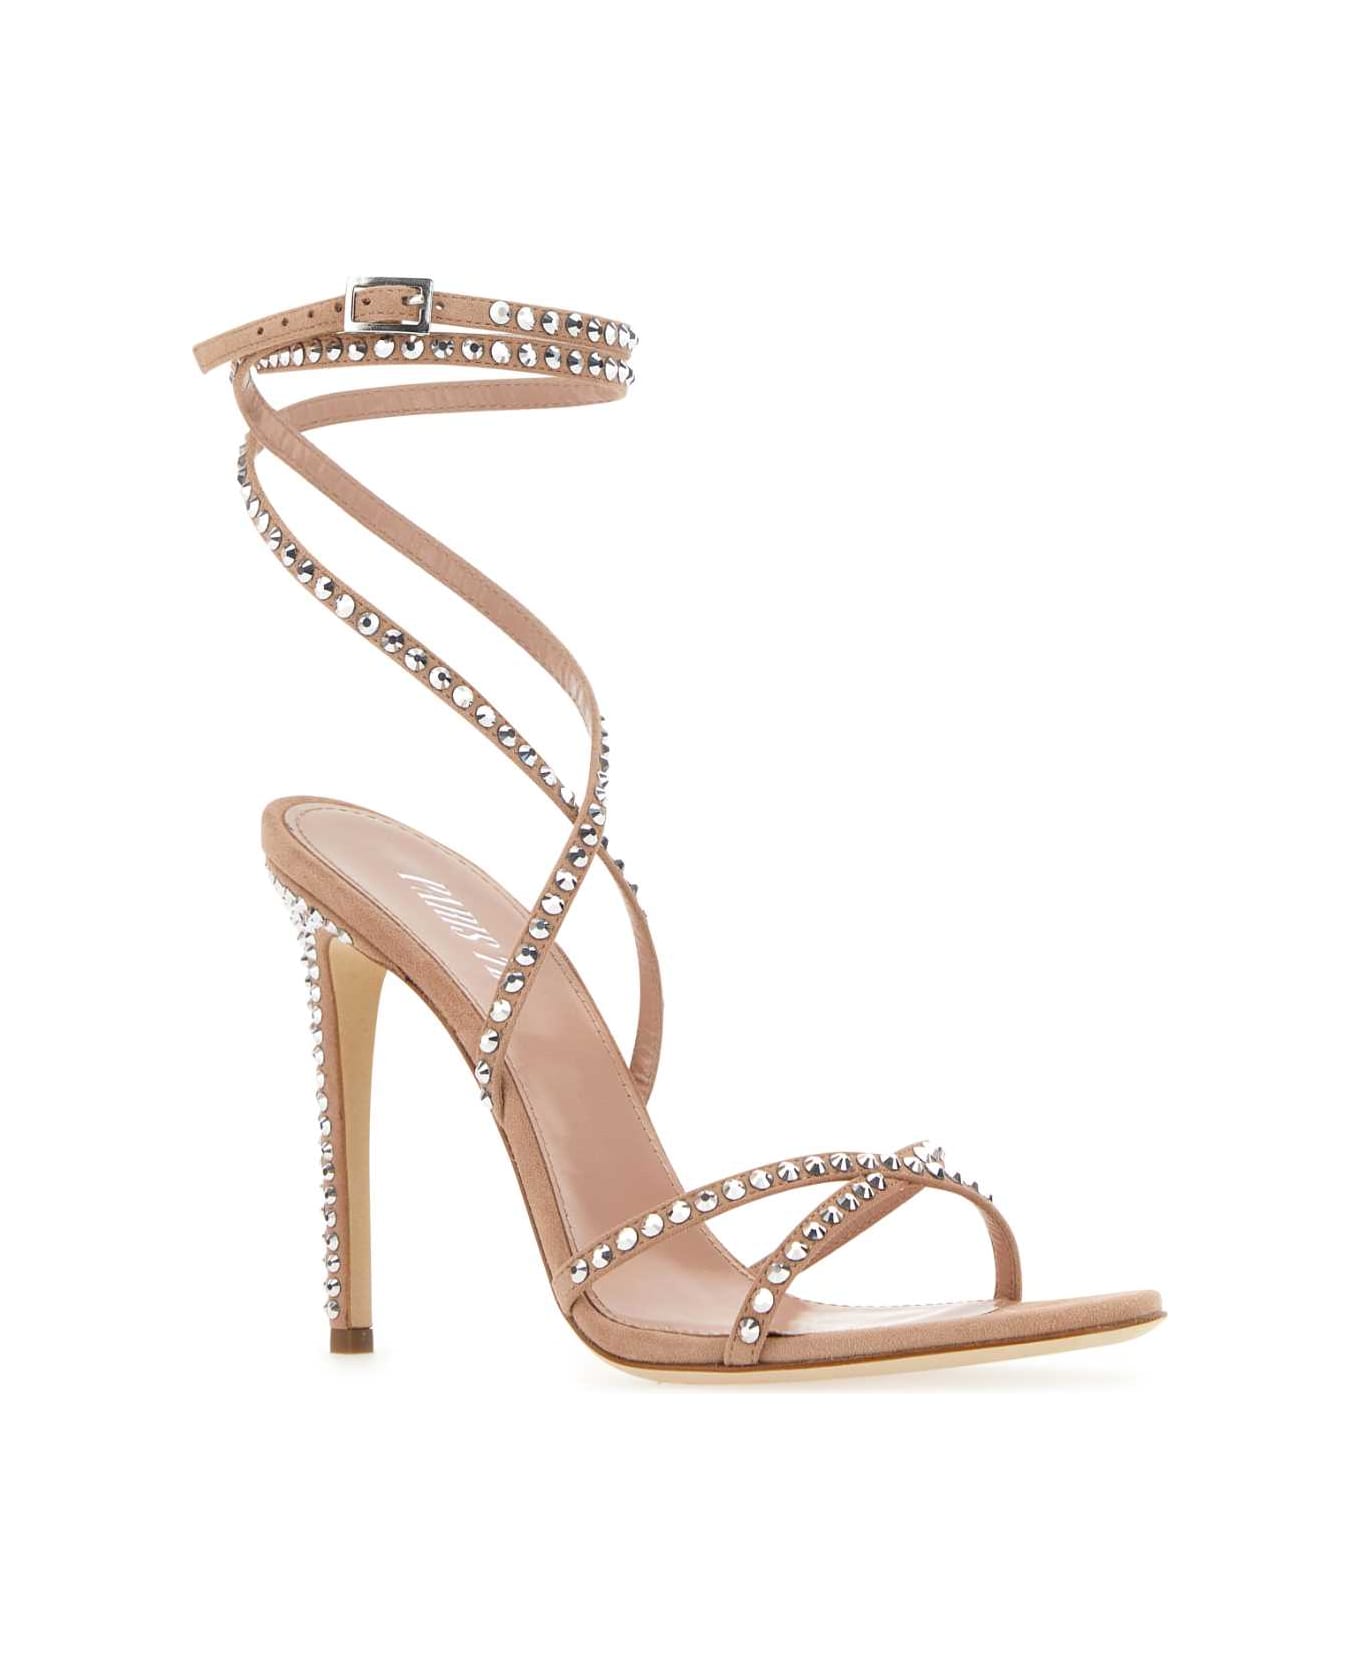 Paris Texas Embellished Suede Holly Zoe Sandals - ROSROCDIA